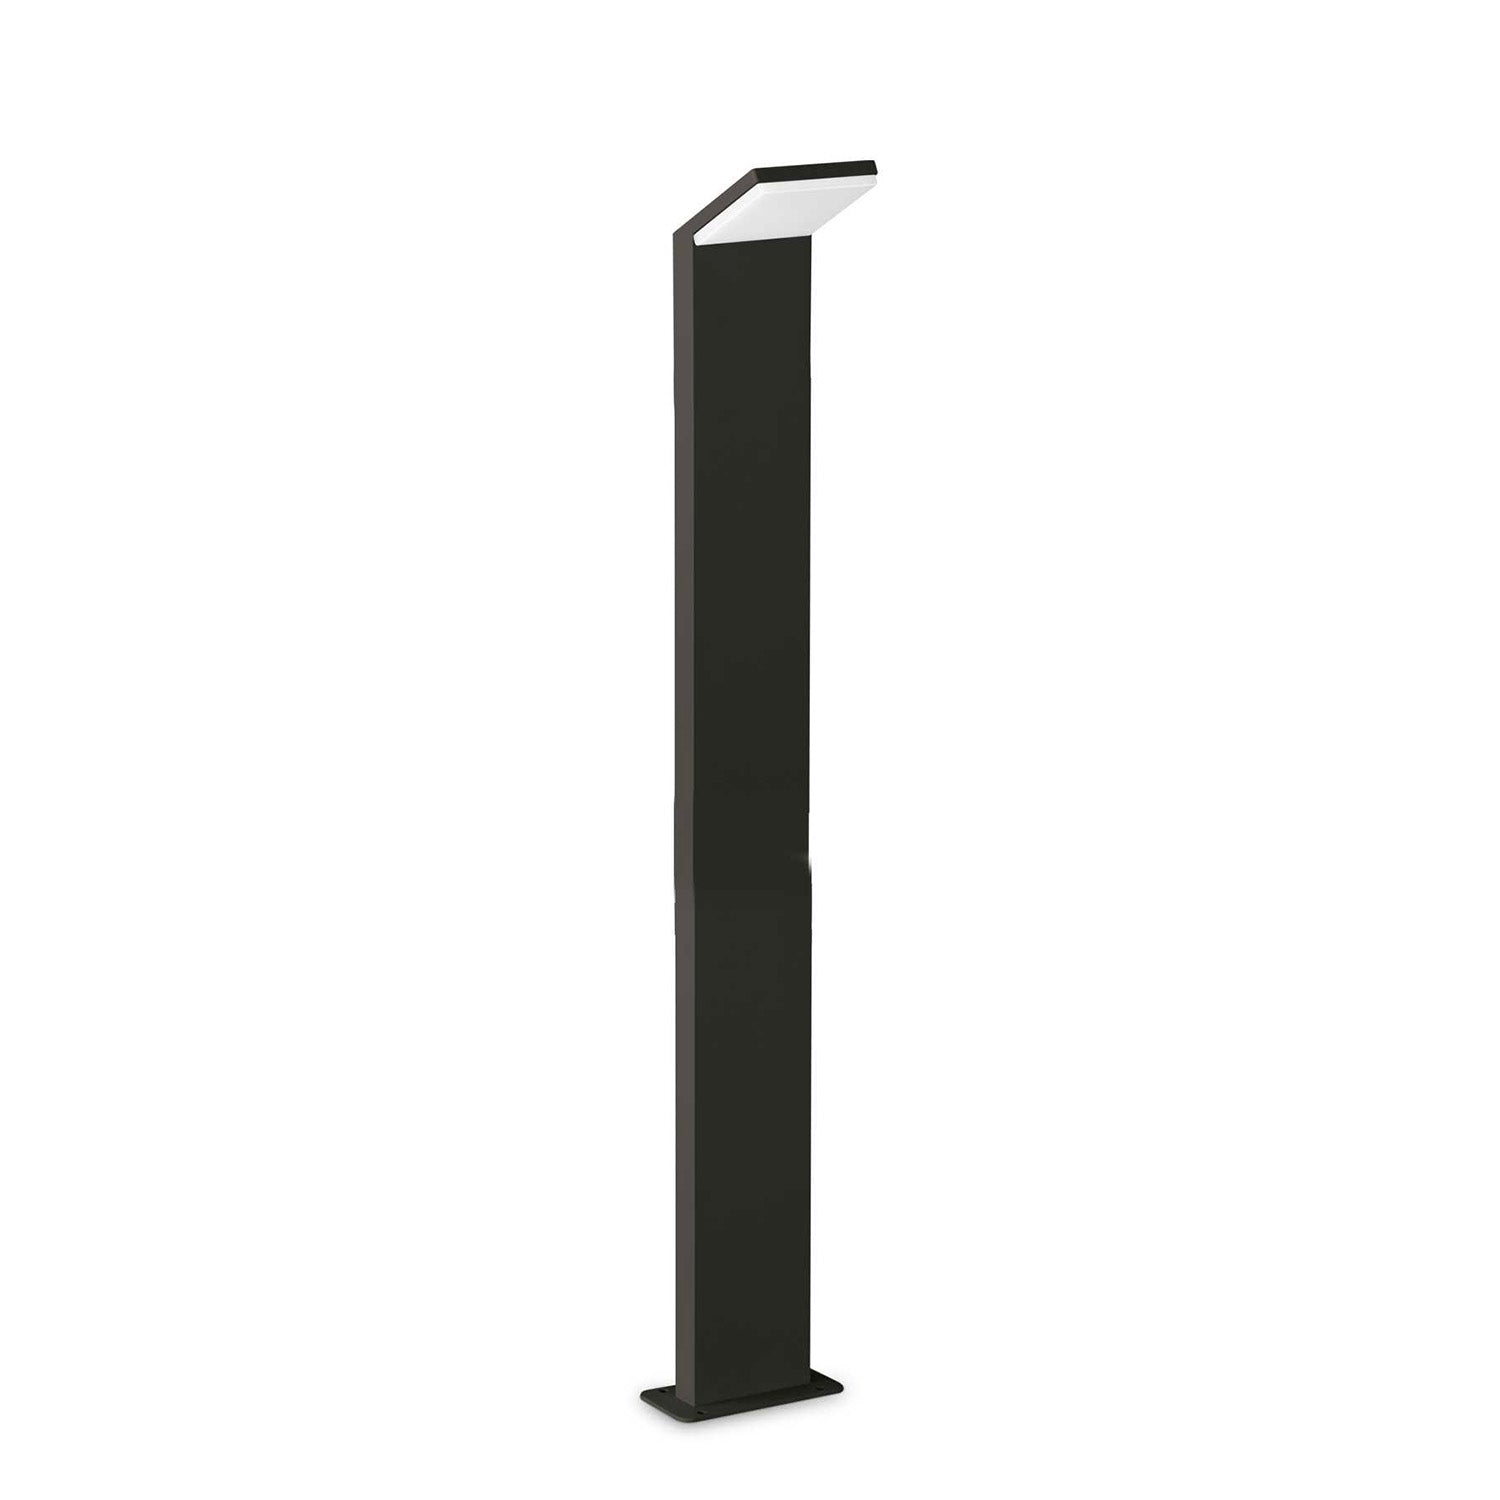 STYLE - Outdoor bollard light with integrated LED